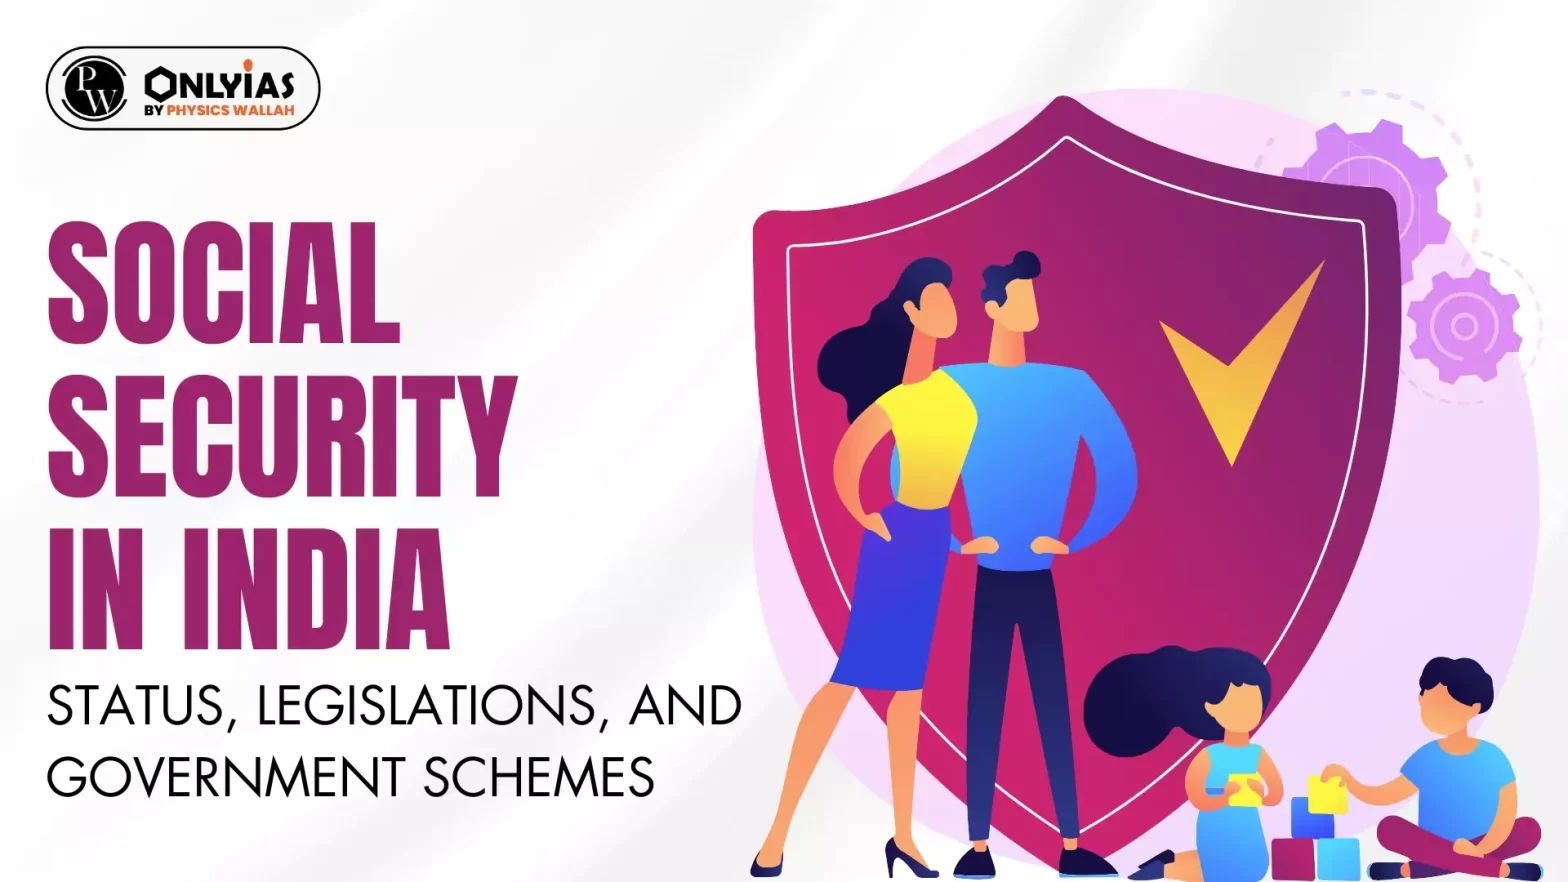 Social Security in India: Status, Legislations, and Government Schemes